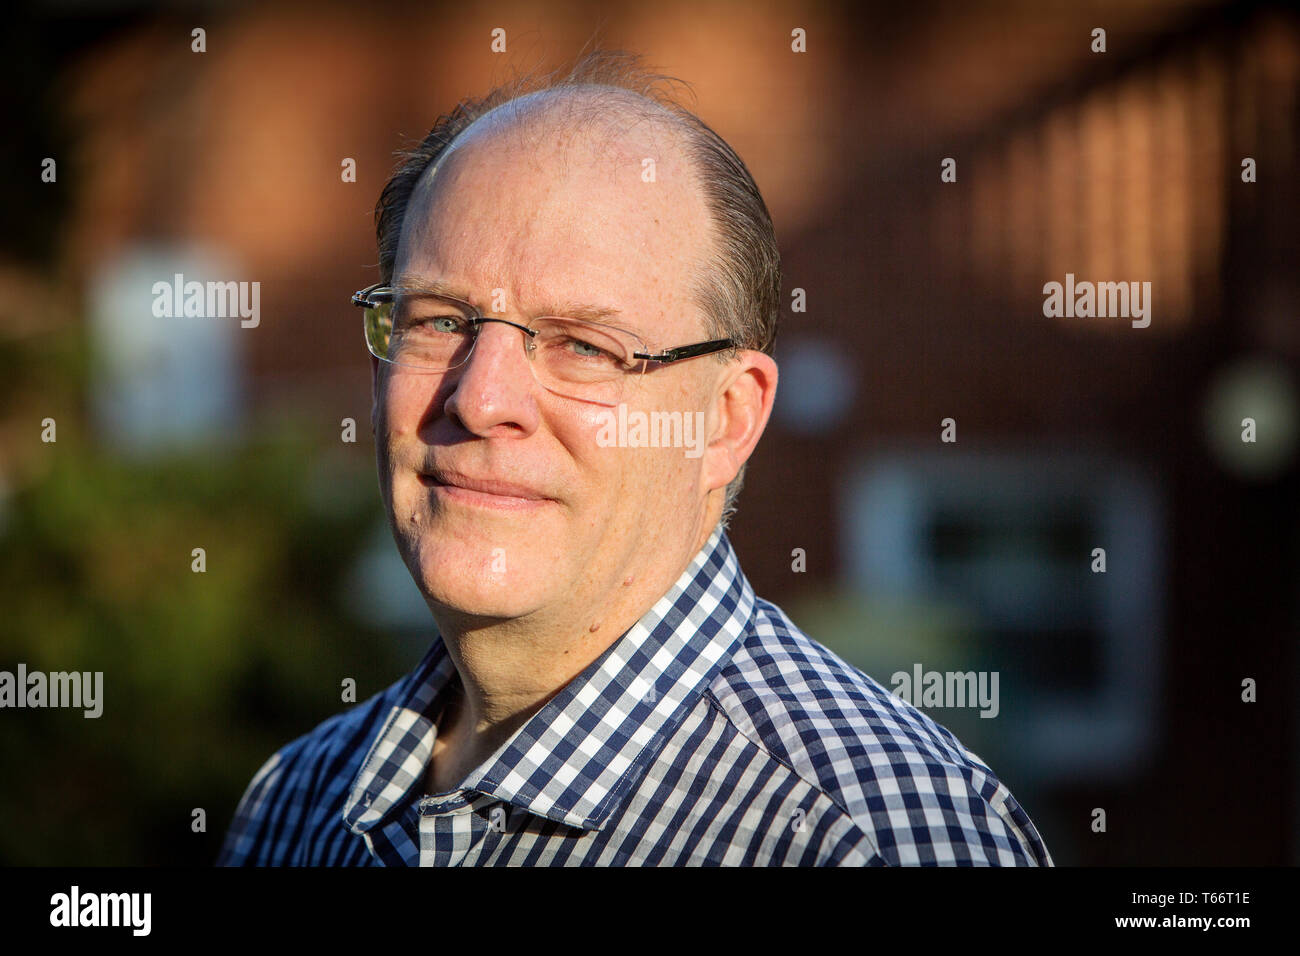 Senior Fellow bei der Ethics and Public Policy Center, Peter Wehner. Stockfoto